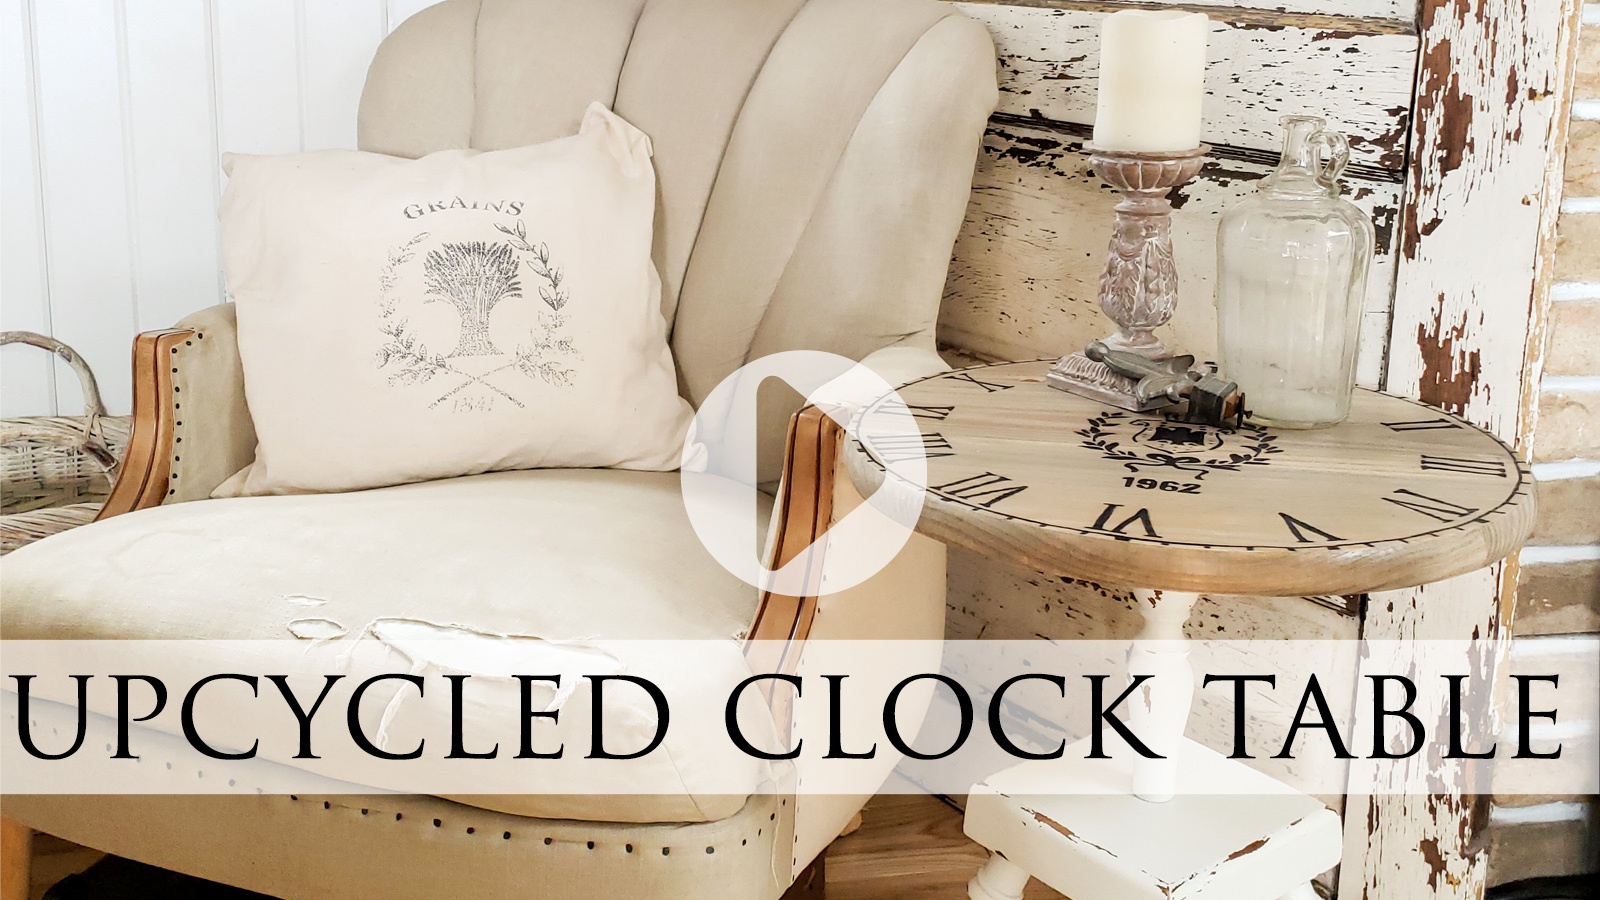 Upcycled Clock Face Table from Vintage Ash Tray by Larissa of Prodigal Pieces | prodigalpieces.com #prodigalpieces